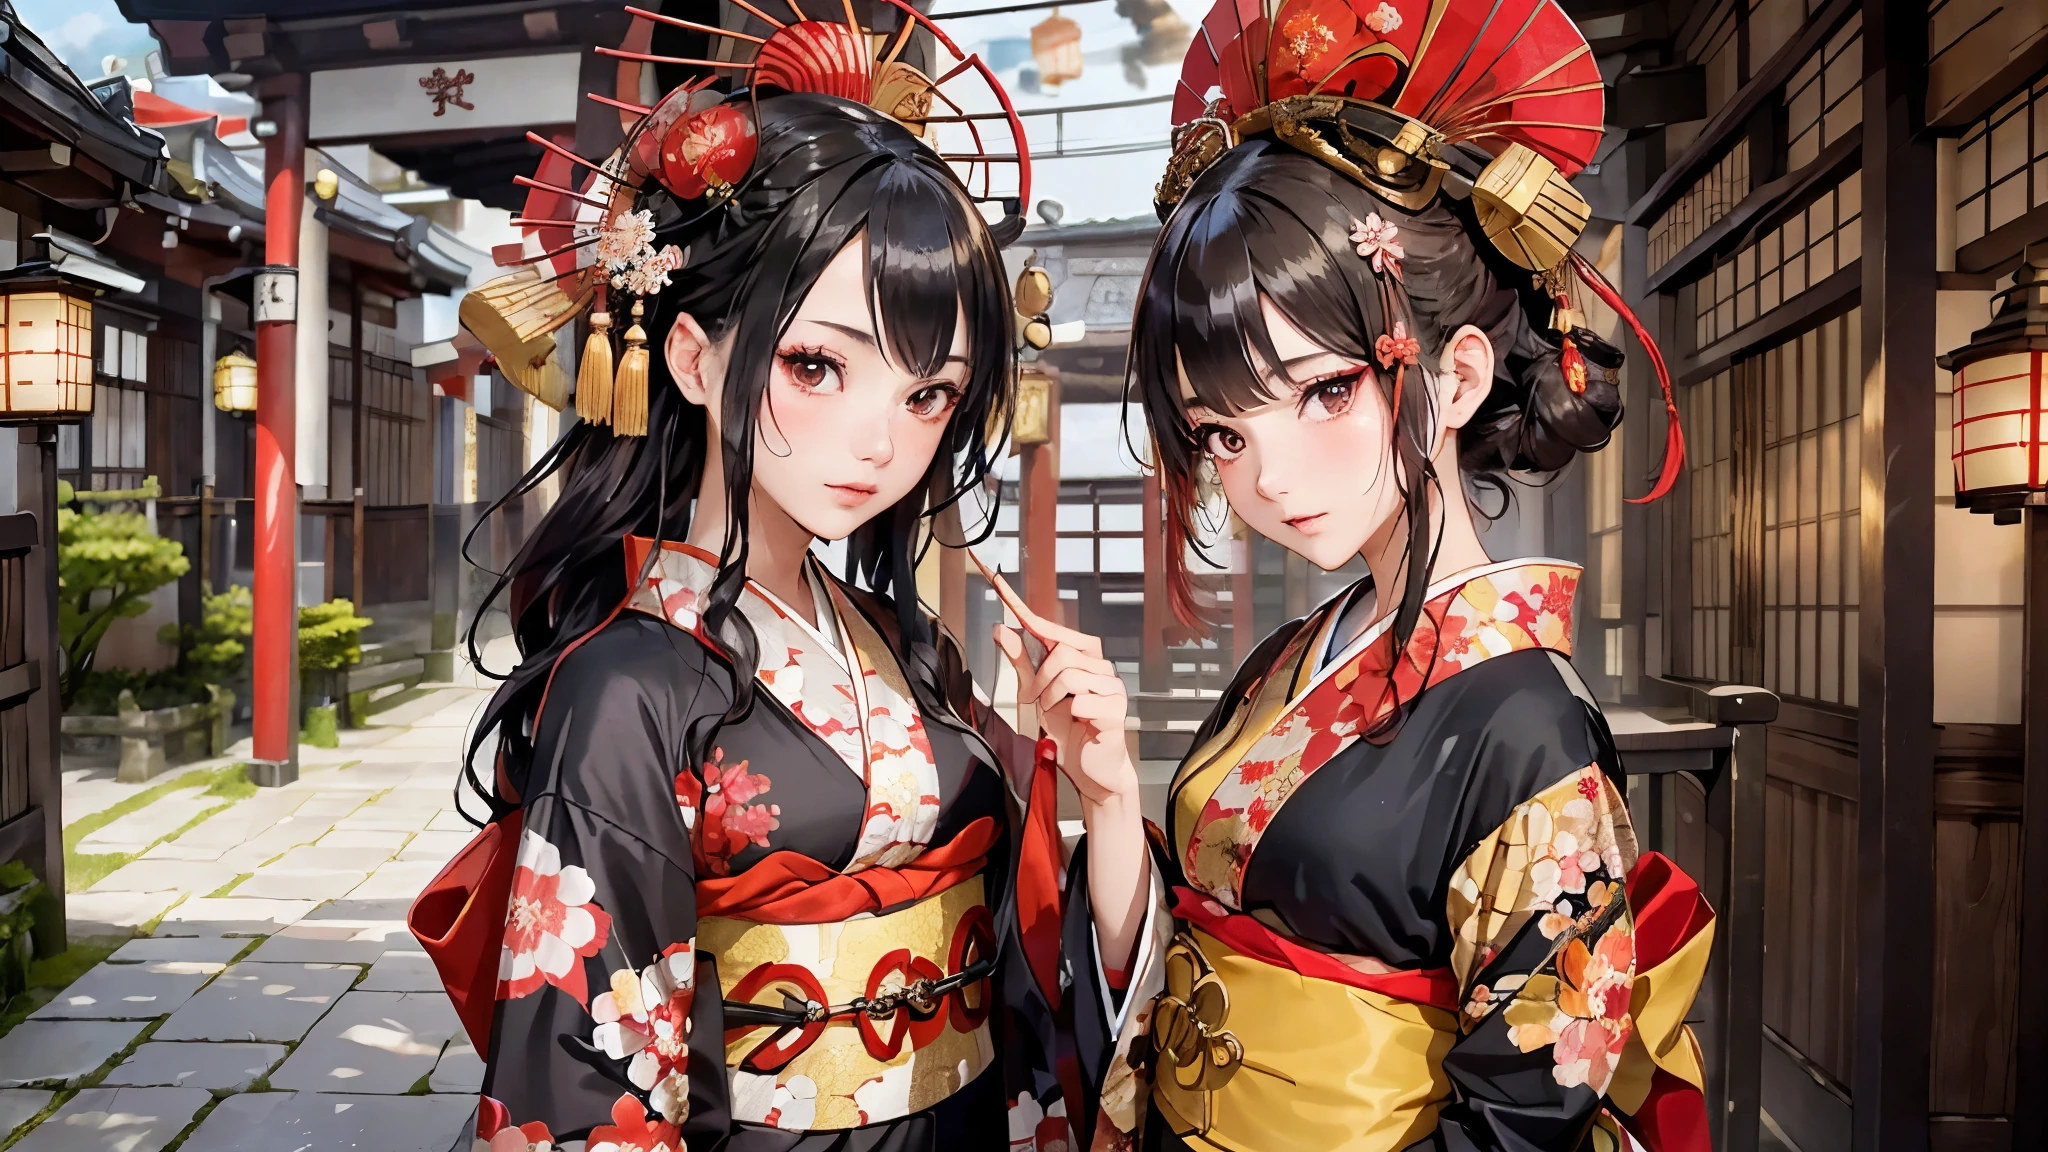 (Oiran:1.4)、1 girl,black hair fringe long hair、braided hair、messy hair、The extraordinary beauty of light brown eyes)、(dignified expression)、(Traditional kimono with colorful and shiny luxury Japan:1.4)、(:1.4)、(Photoreal)、(intricate details:1.2)、(masterpiece、:1.3)、(highest quality:1.4)、(超A high resolution:1.2)、超A high resolution、(detailed eye)、(detailed facial features)、wearing a kimono_great night of clothes:1.4)、cherry blossom moon、five-storied pagoda、Japanese Temples